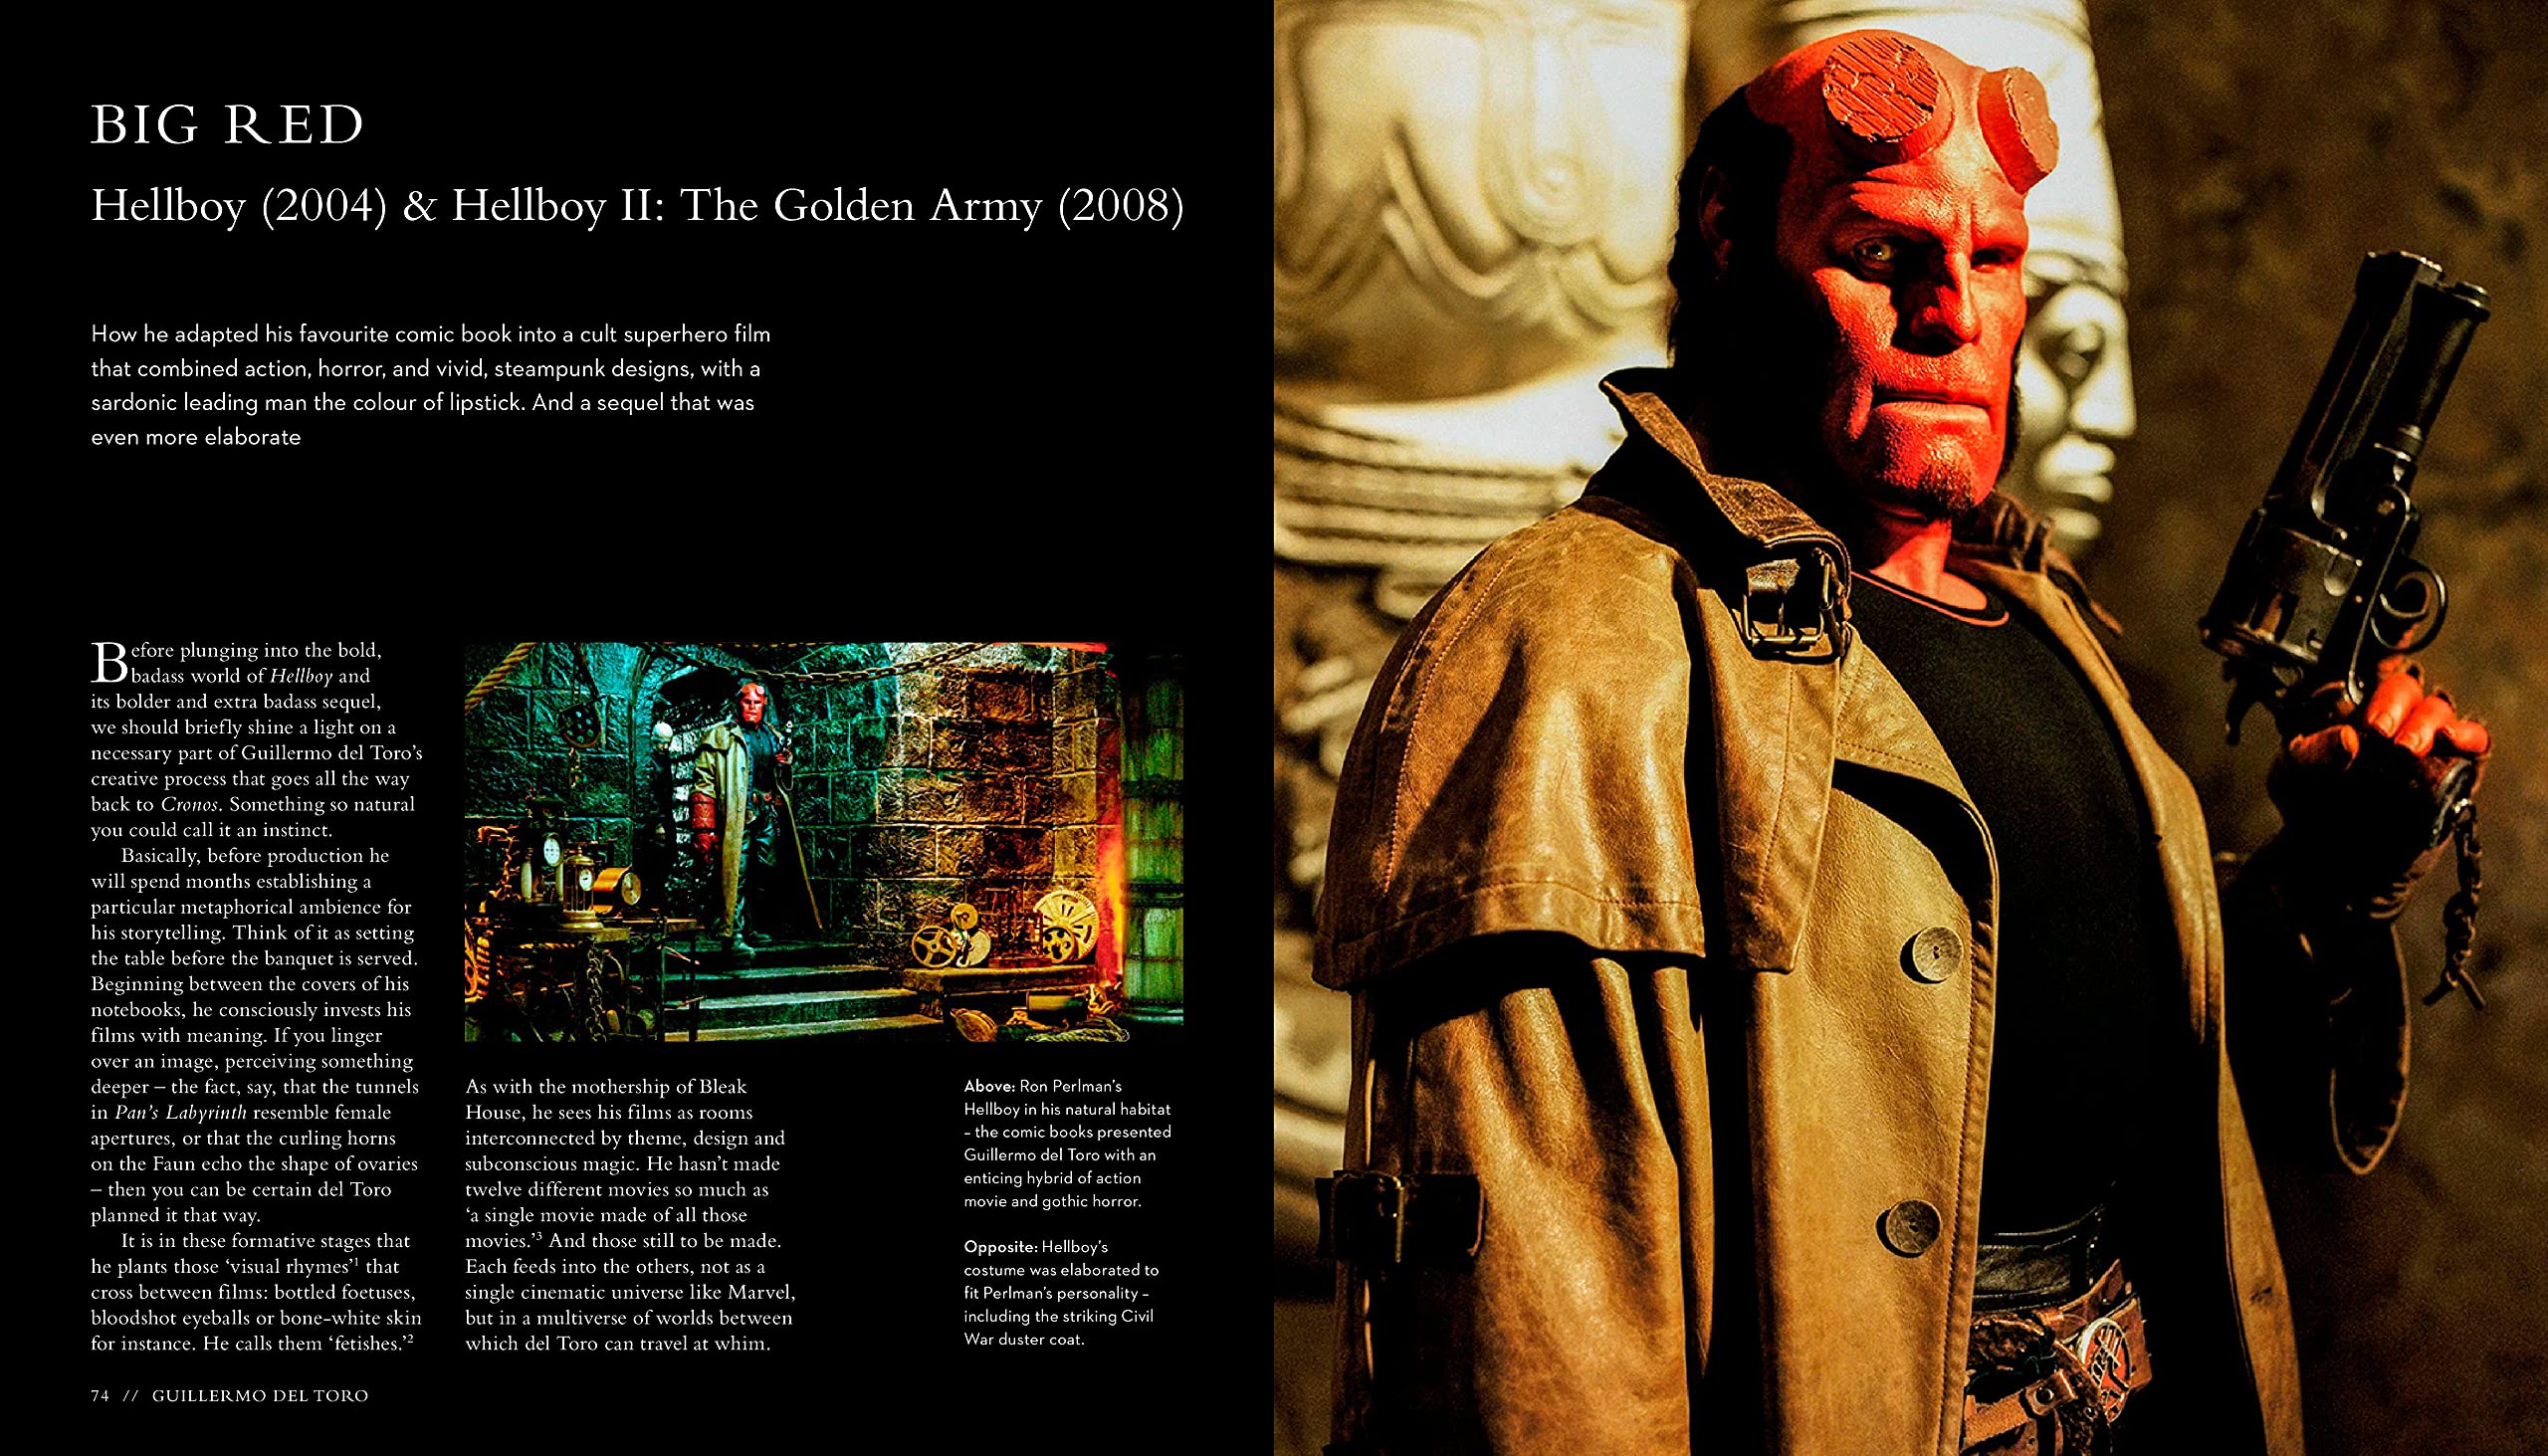 Guillermo del Toro - The Iconic Filmmaker and his Work - Page Spread 01